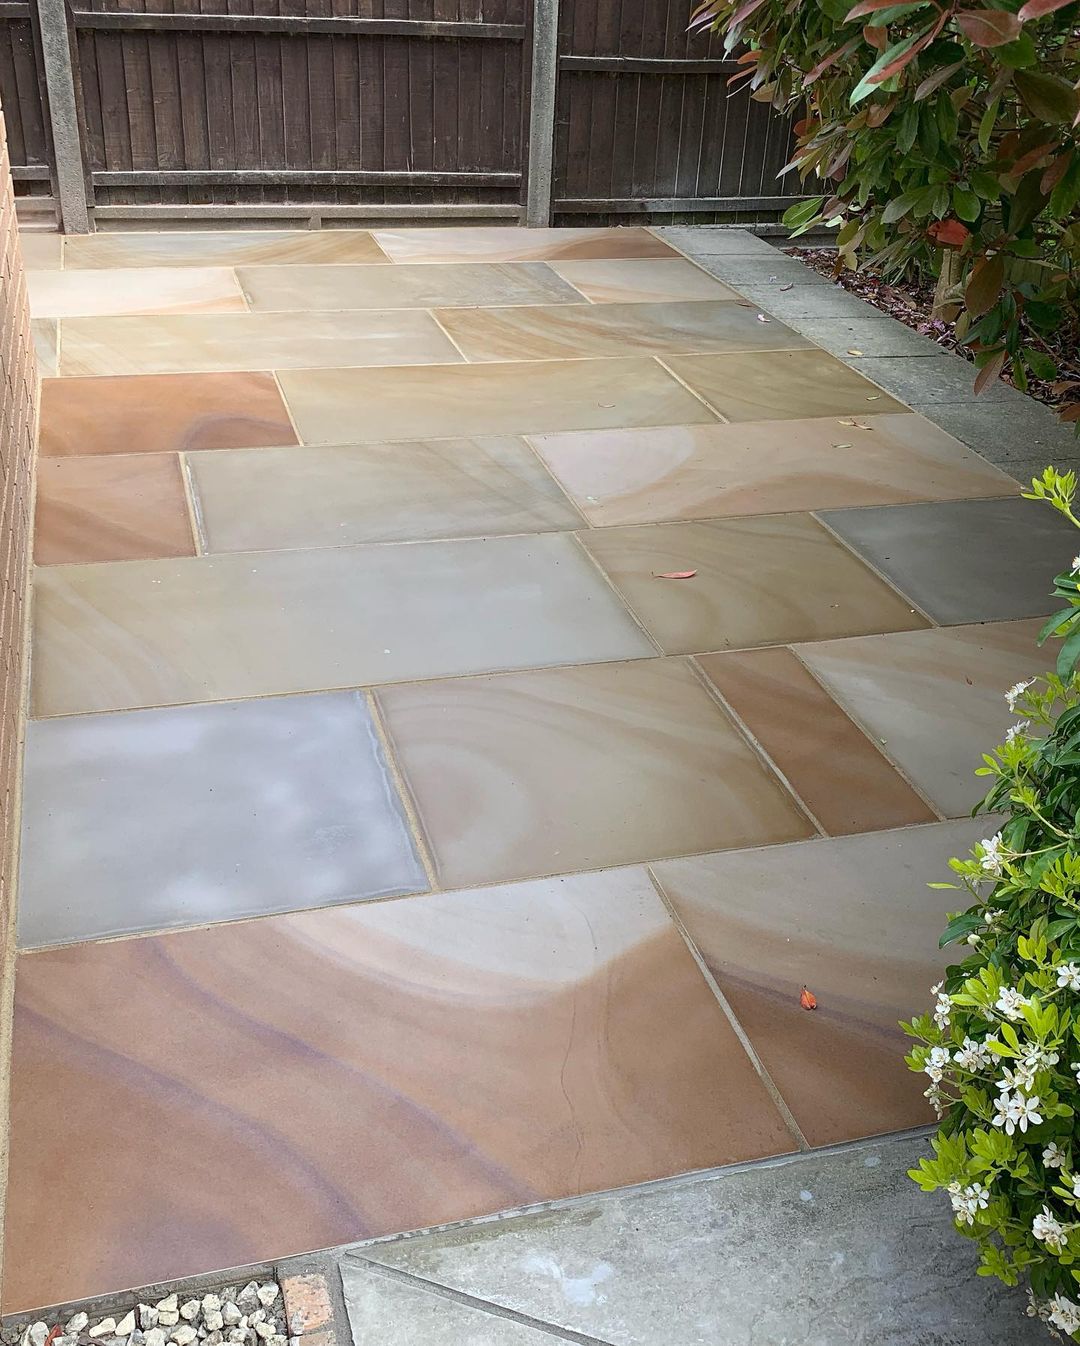 Rippon Buff Indian Sandstone Paving Slabs - Sawn & Honed - 900x600 - 20mm - Smooth Paving - Universal Paving UK Limited Premier Supplier